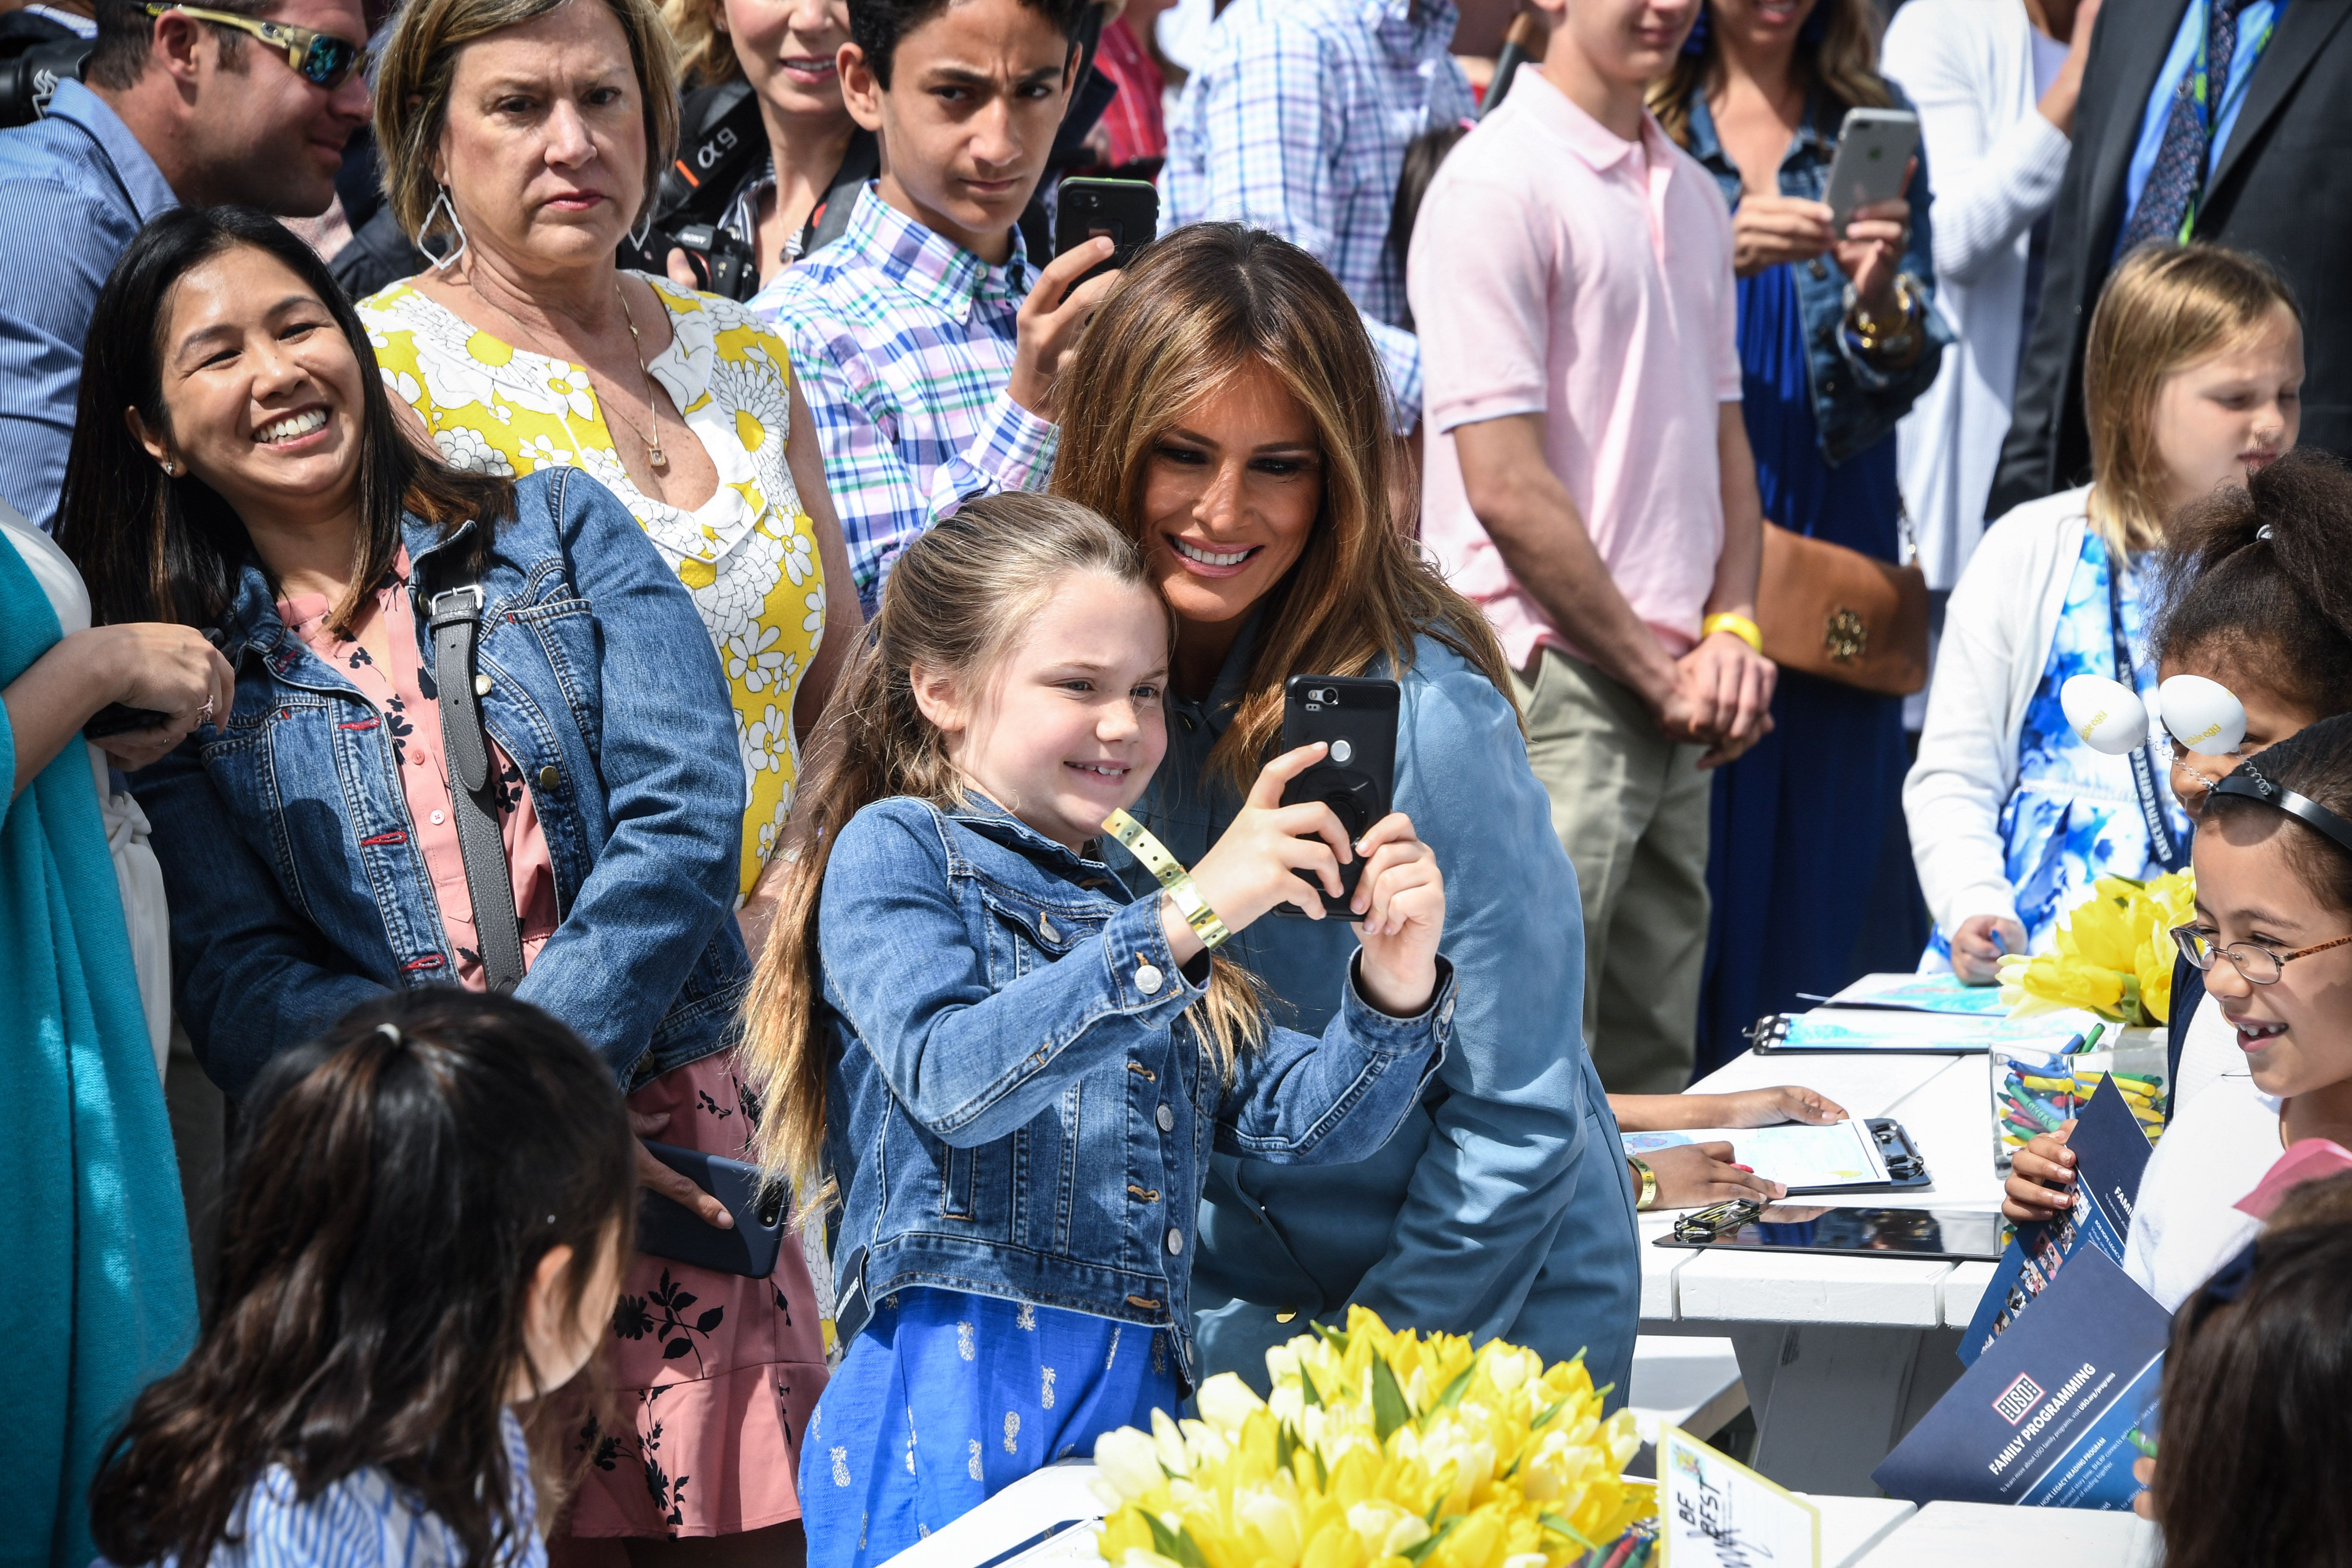 Melania Trump poses with a child for a selfie.